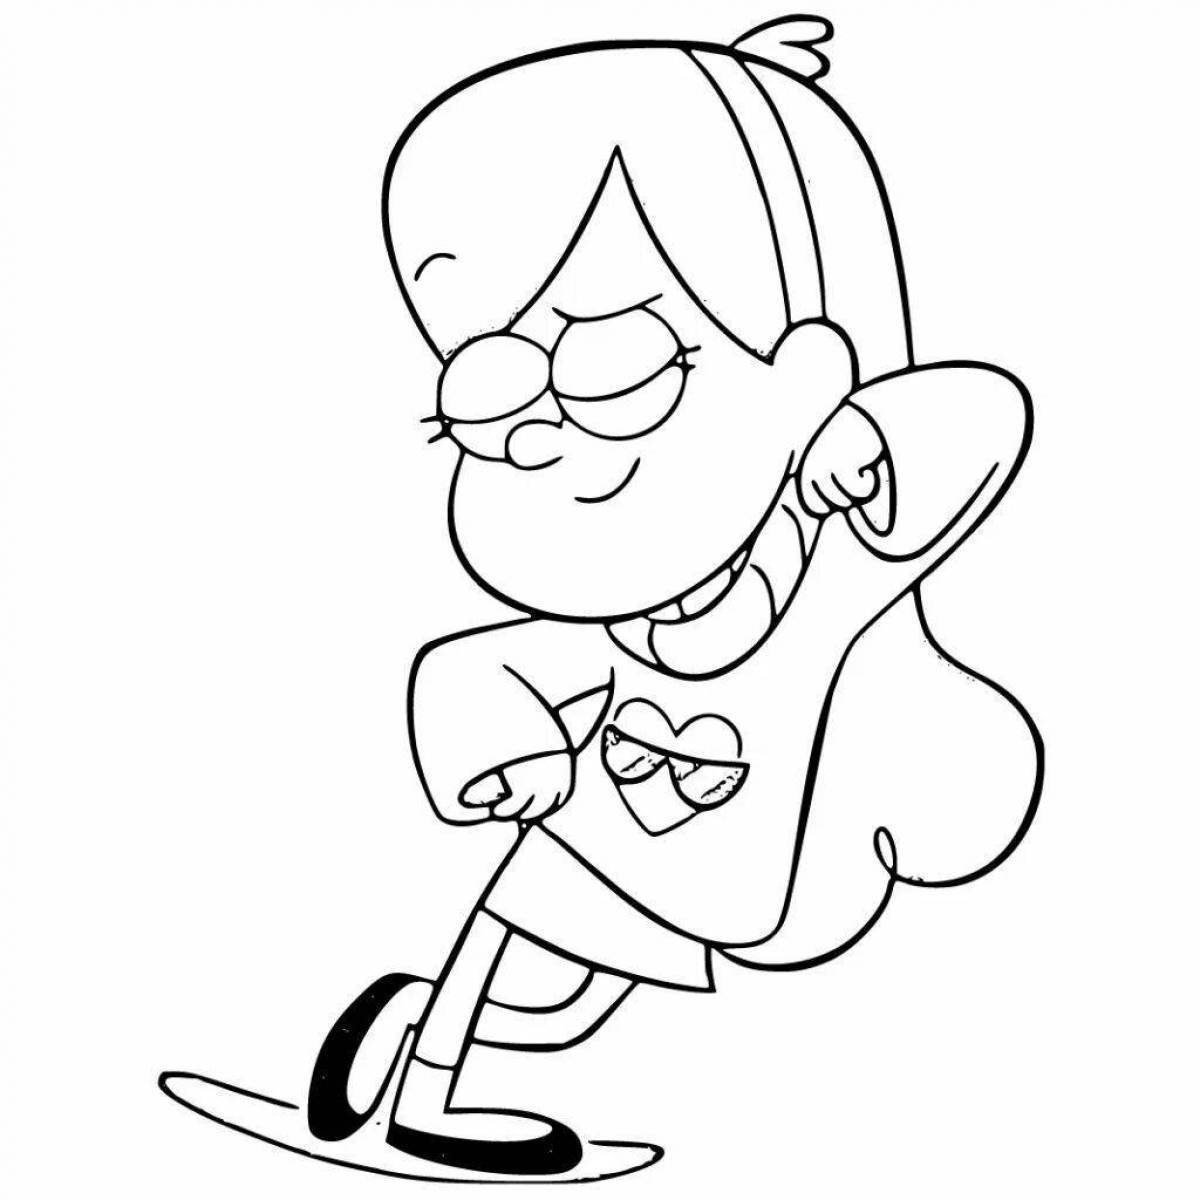 Dipper from gravity falls #9